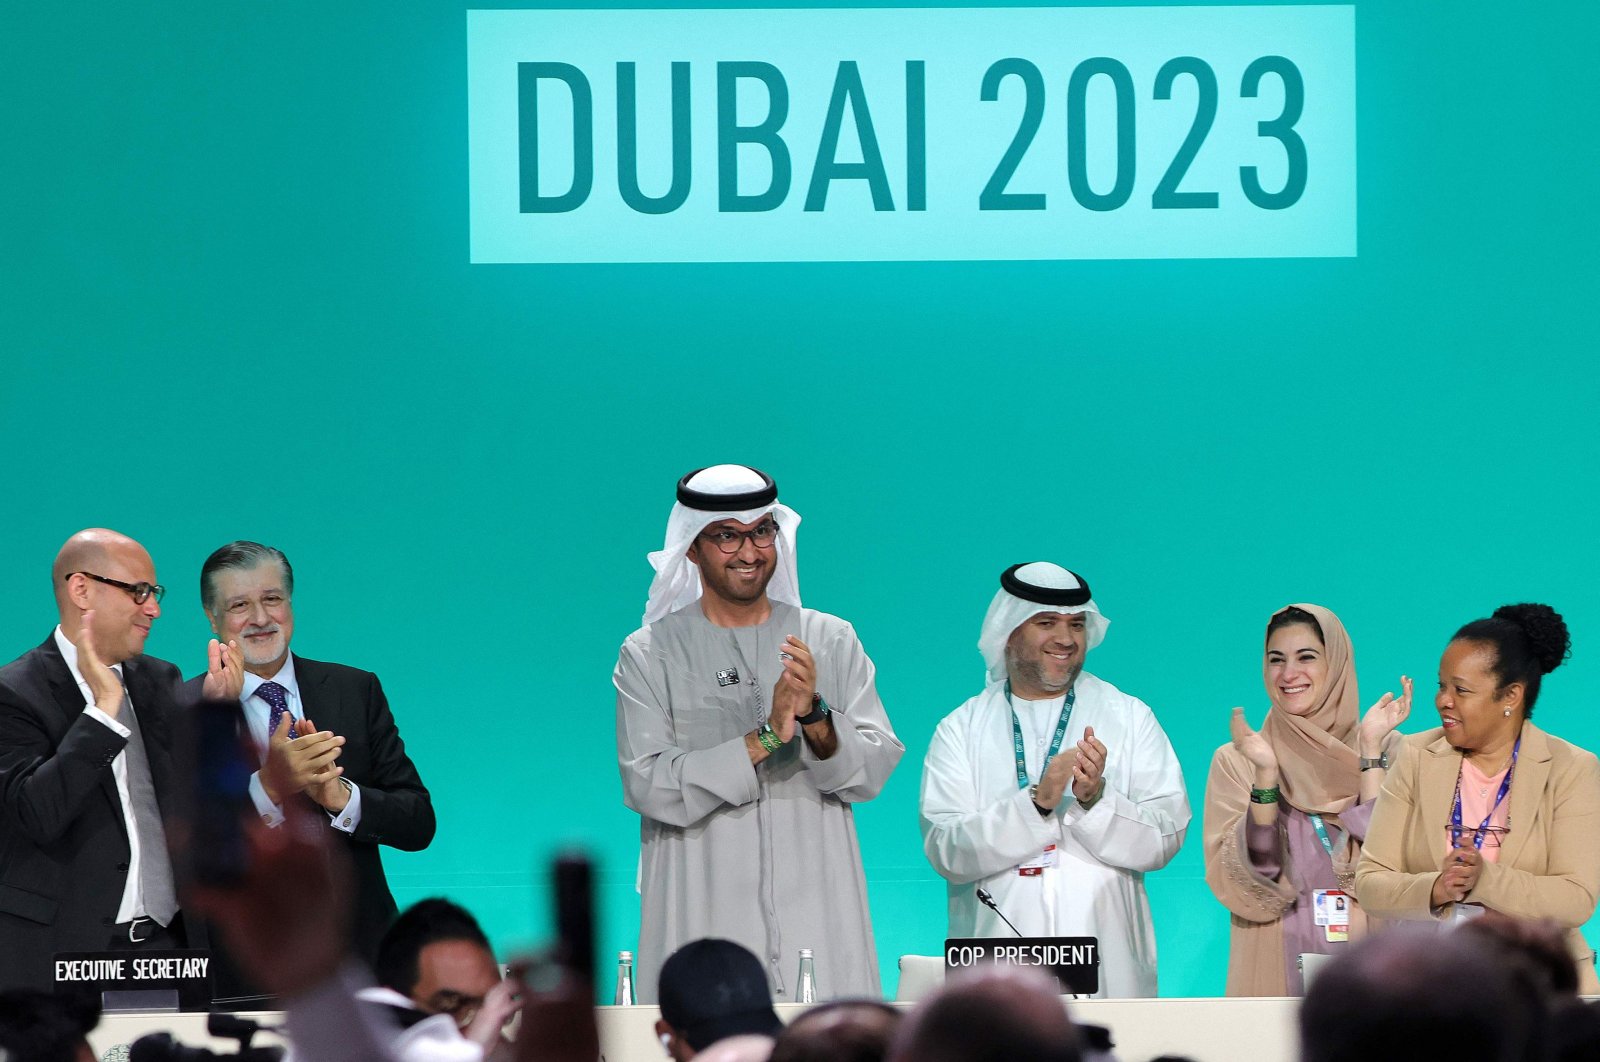 COP28 President Sultan Ahmed Al Jaber (C) applauds among other officials before a plenary session during the United Nations climate summit in Dubai, United Arab Emirates, Dec. 13, 2023. (AFP Photo)